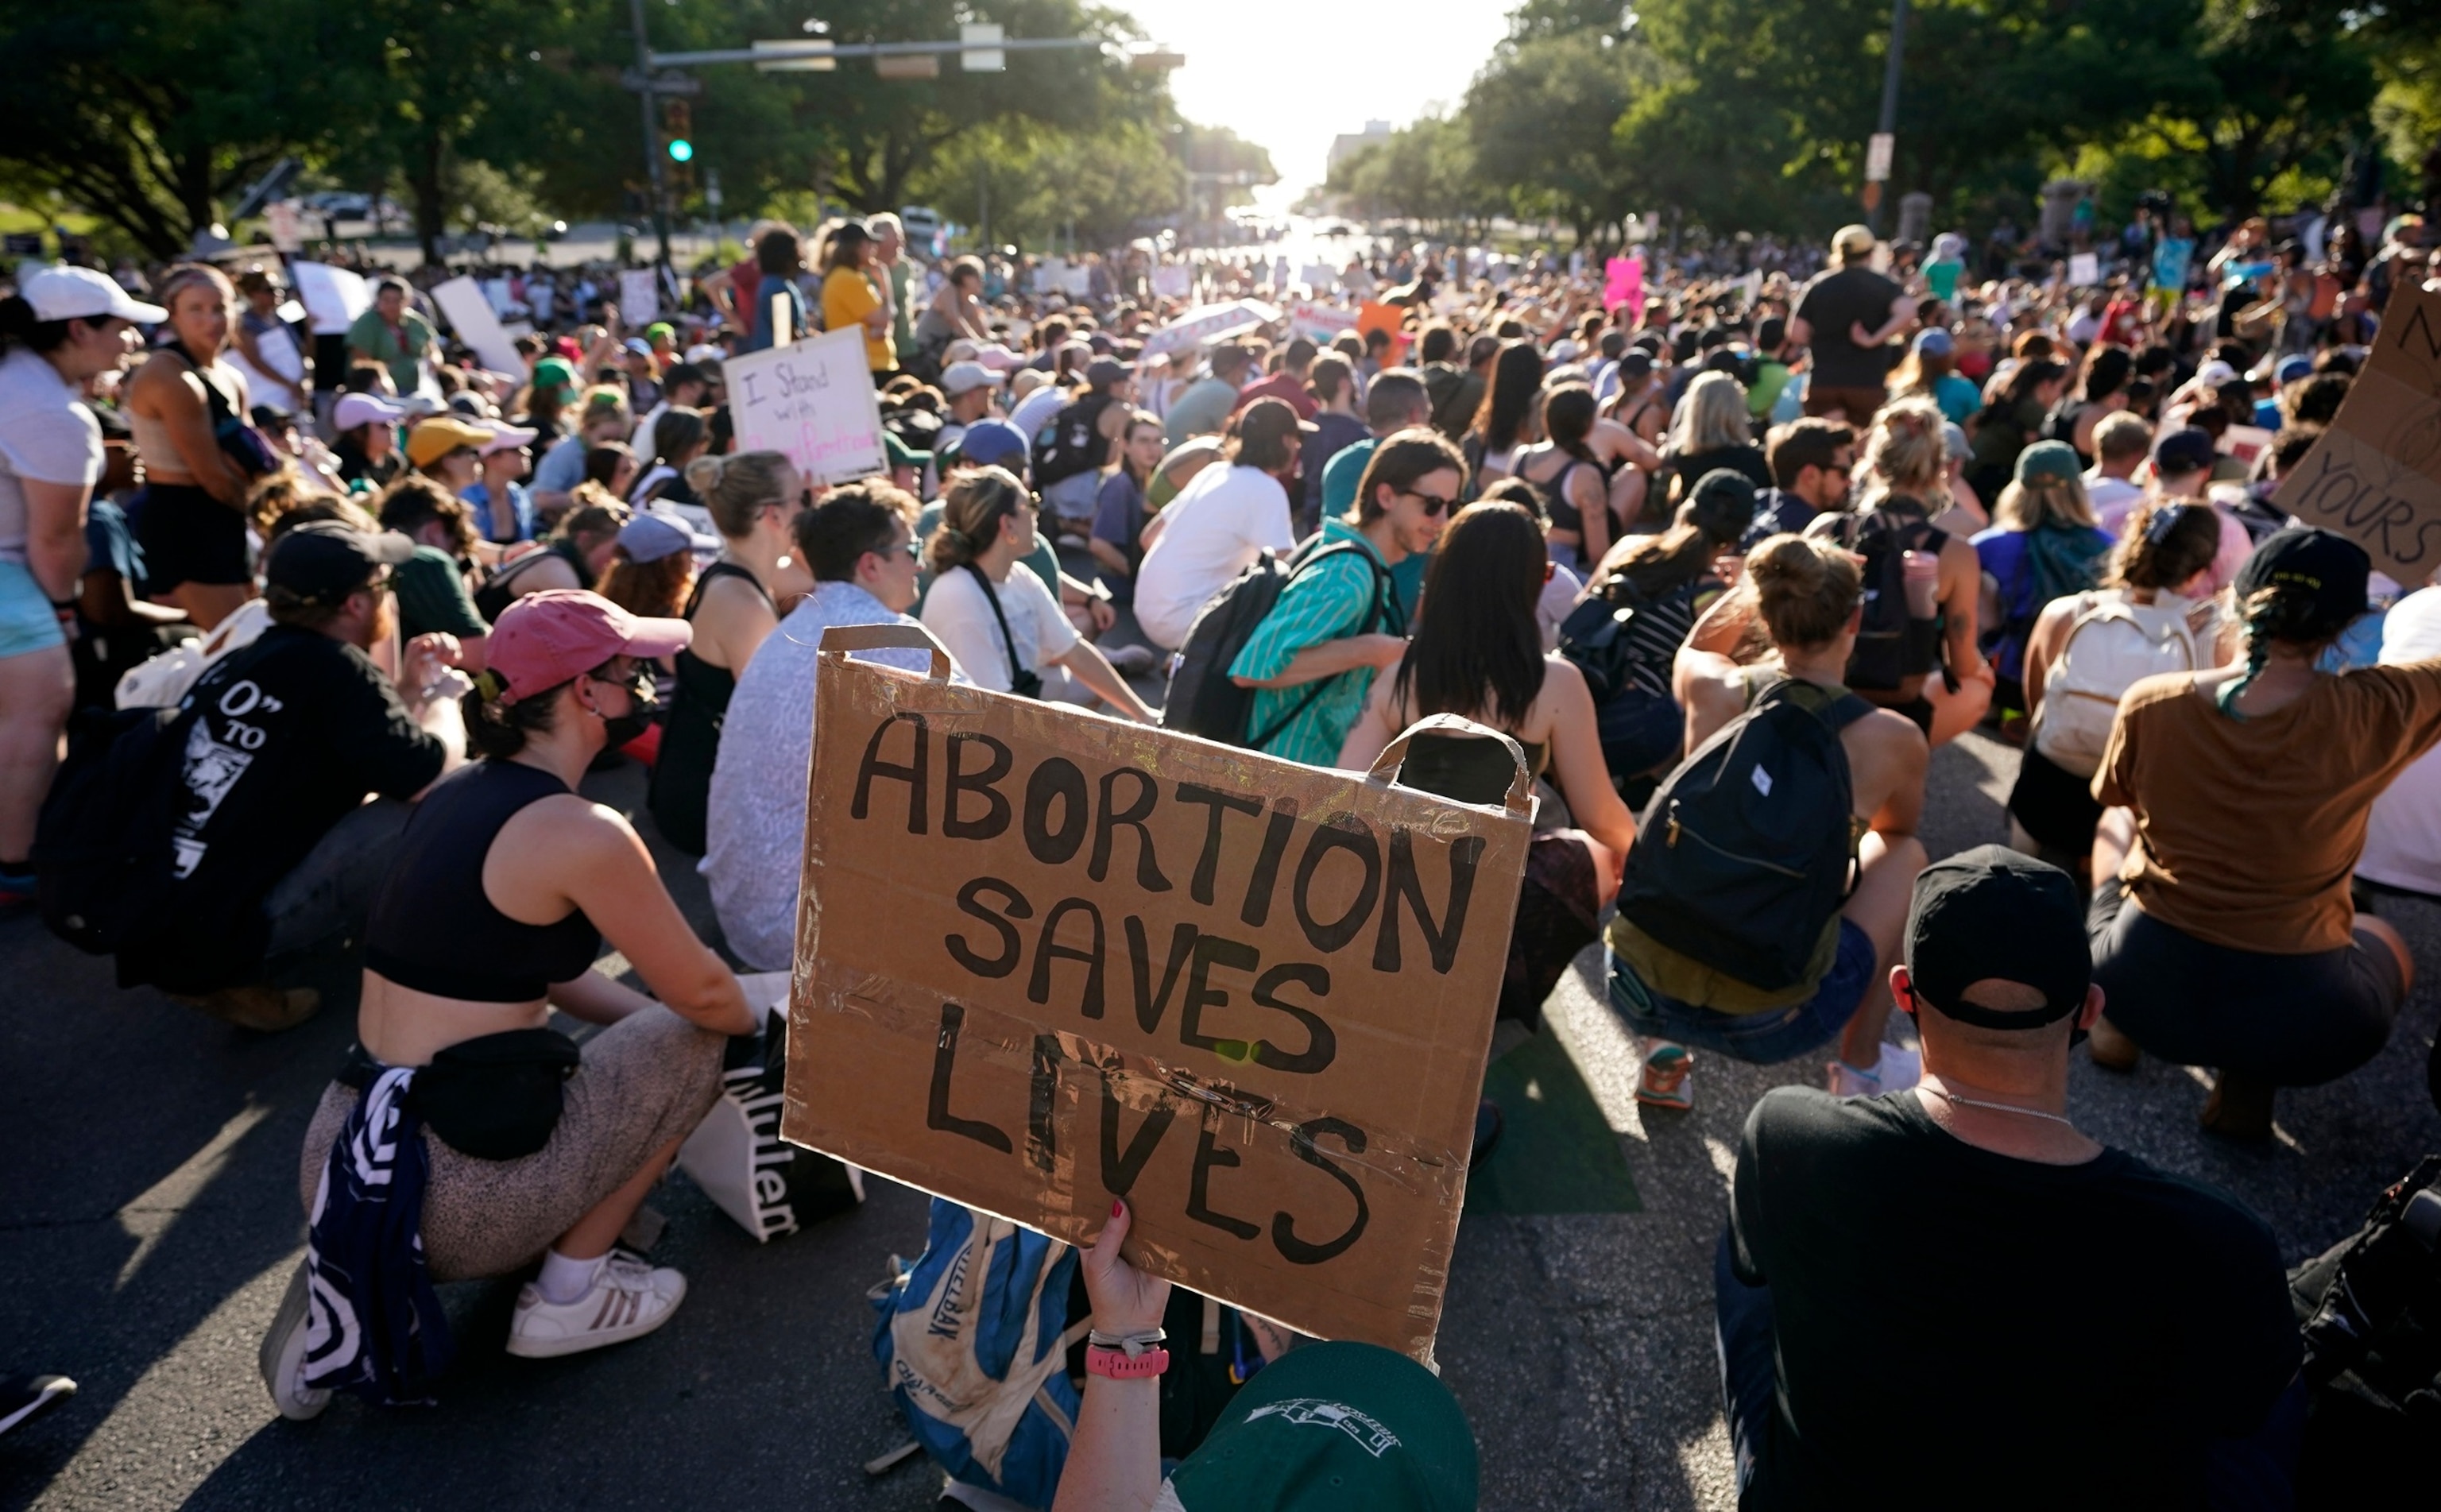 PHOTO: Demonstrators march and gather near the Texas Capitol following the U.S. Supreme Court's decision to overturn Roe v. Wade, June 24, 2022, in Austin.